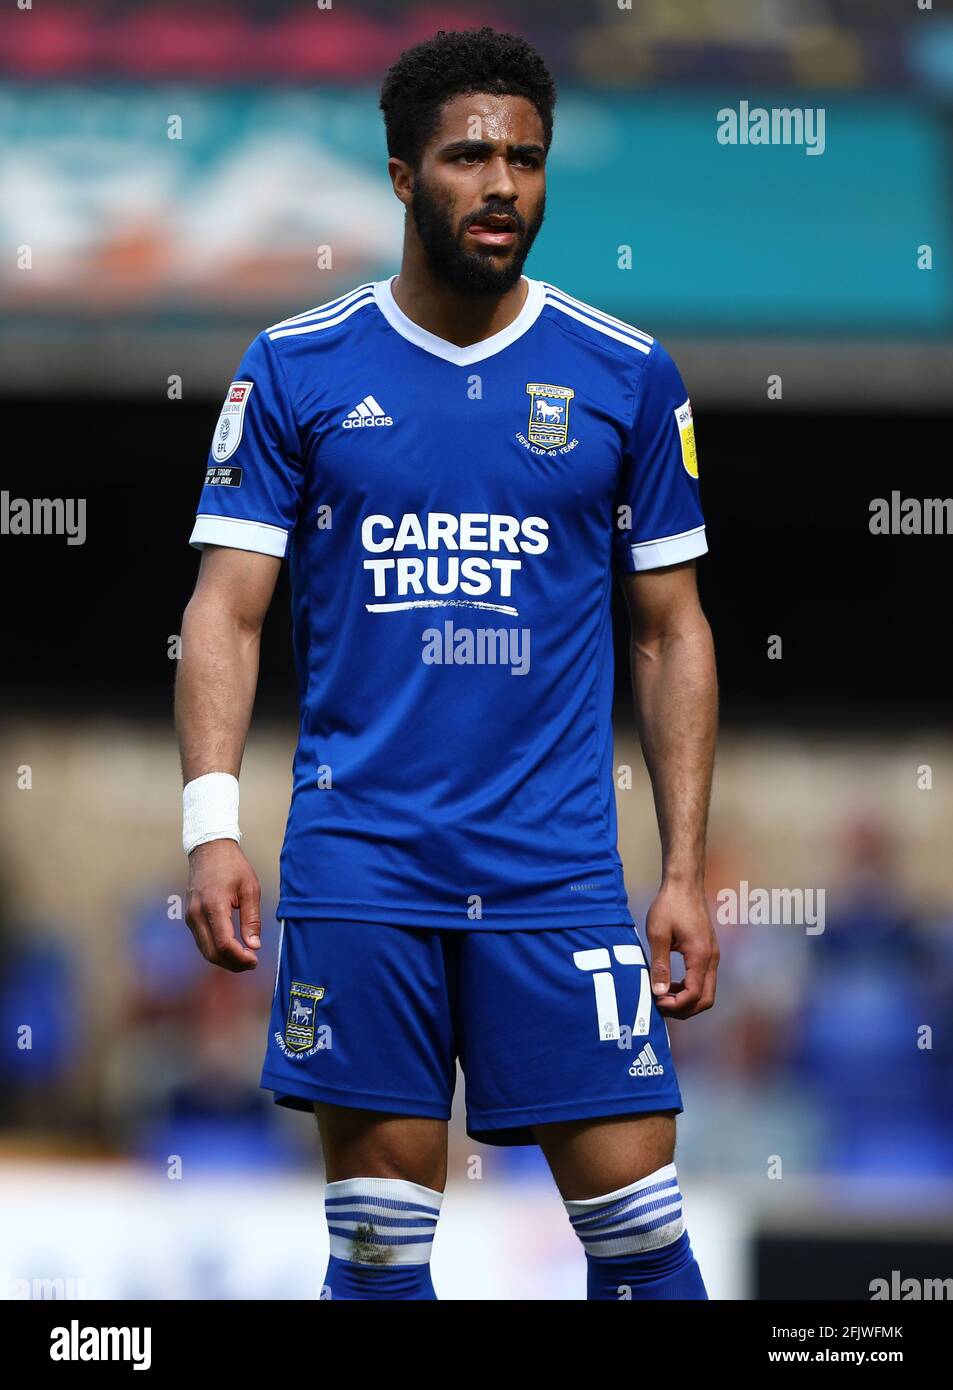 Keanan Bennetts of Ipswich Town - Ipswich Town v AFC Wimbledon, Sky Bet League One, Portman Road, Ipswich, UK - 24th April 2021  Editorial Use Only - DataCo restrictions apply Stock Photo